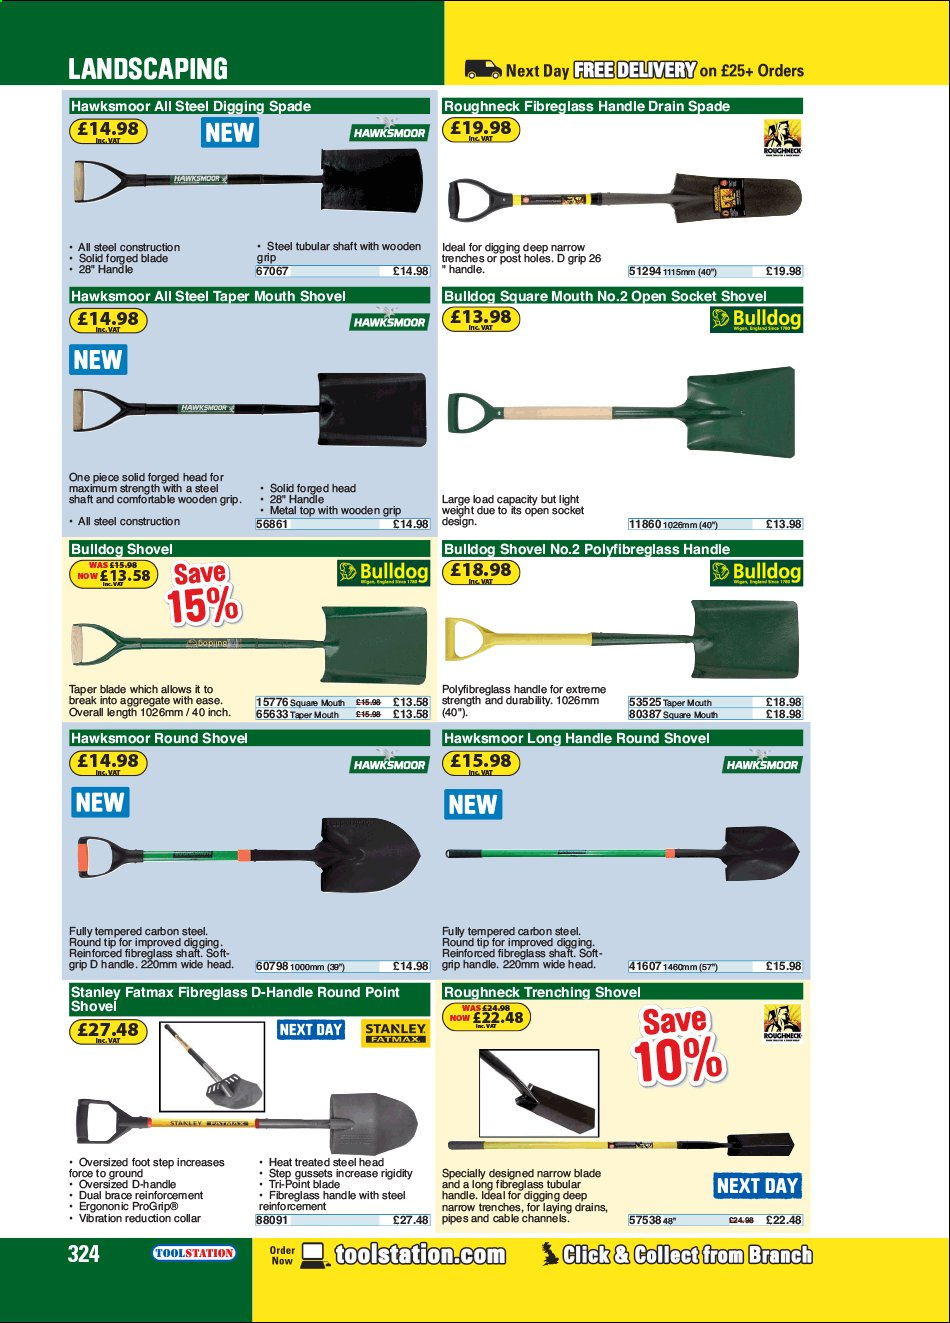 Toolstation offer . Page 324.